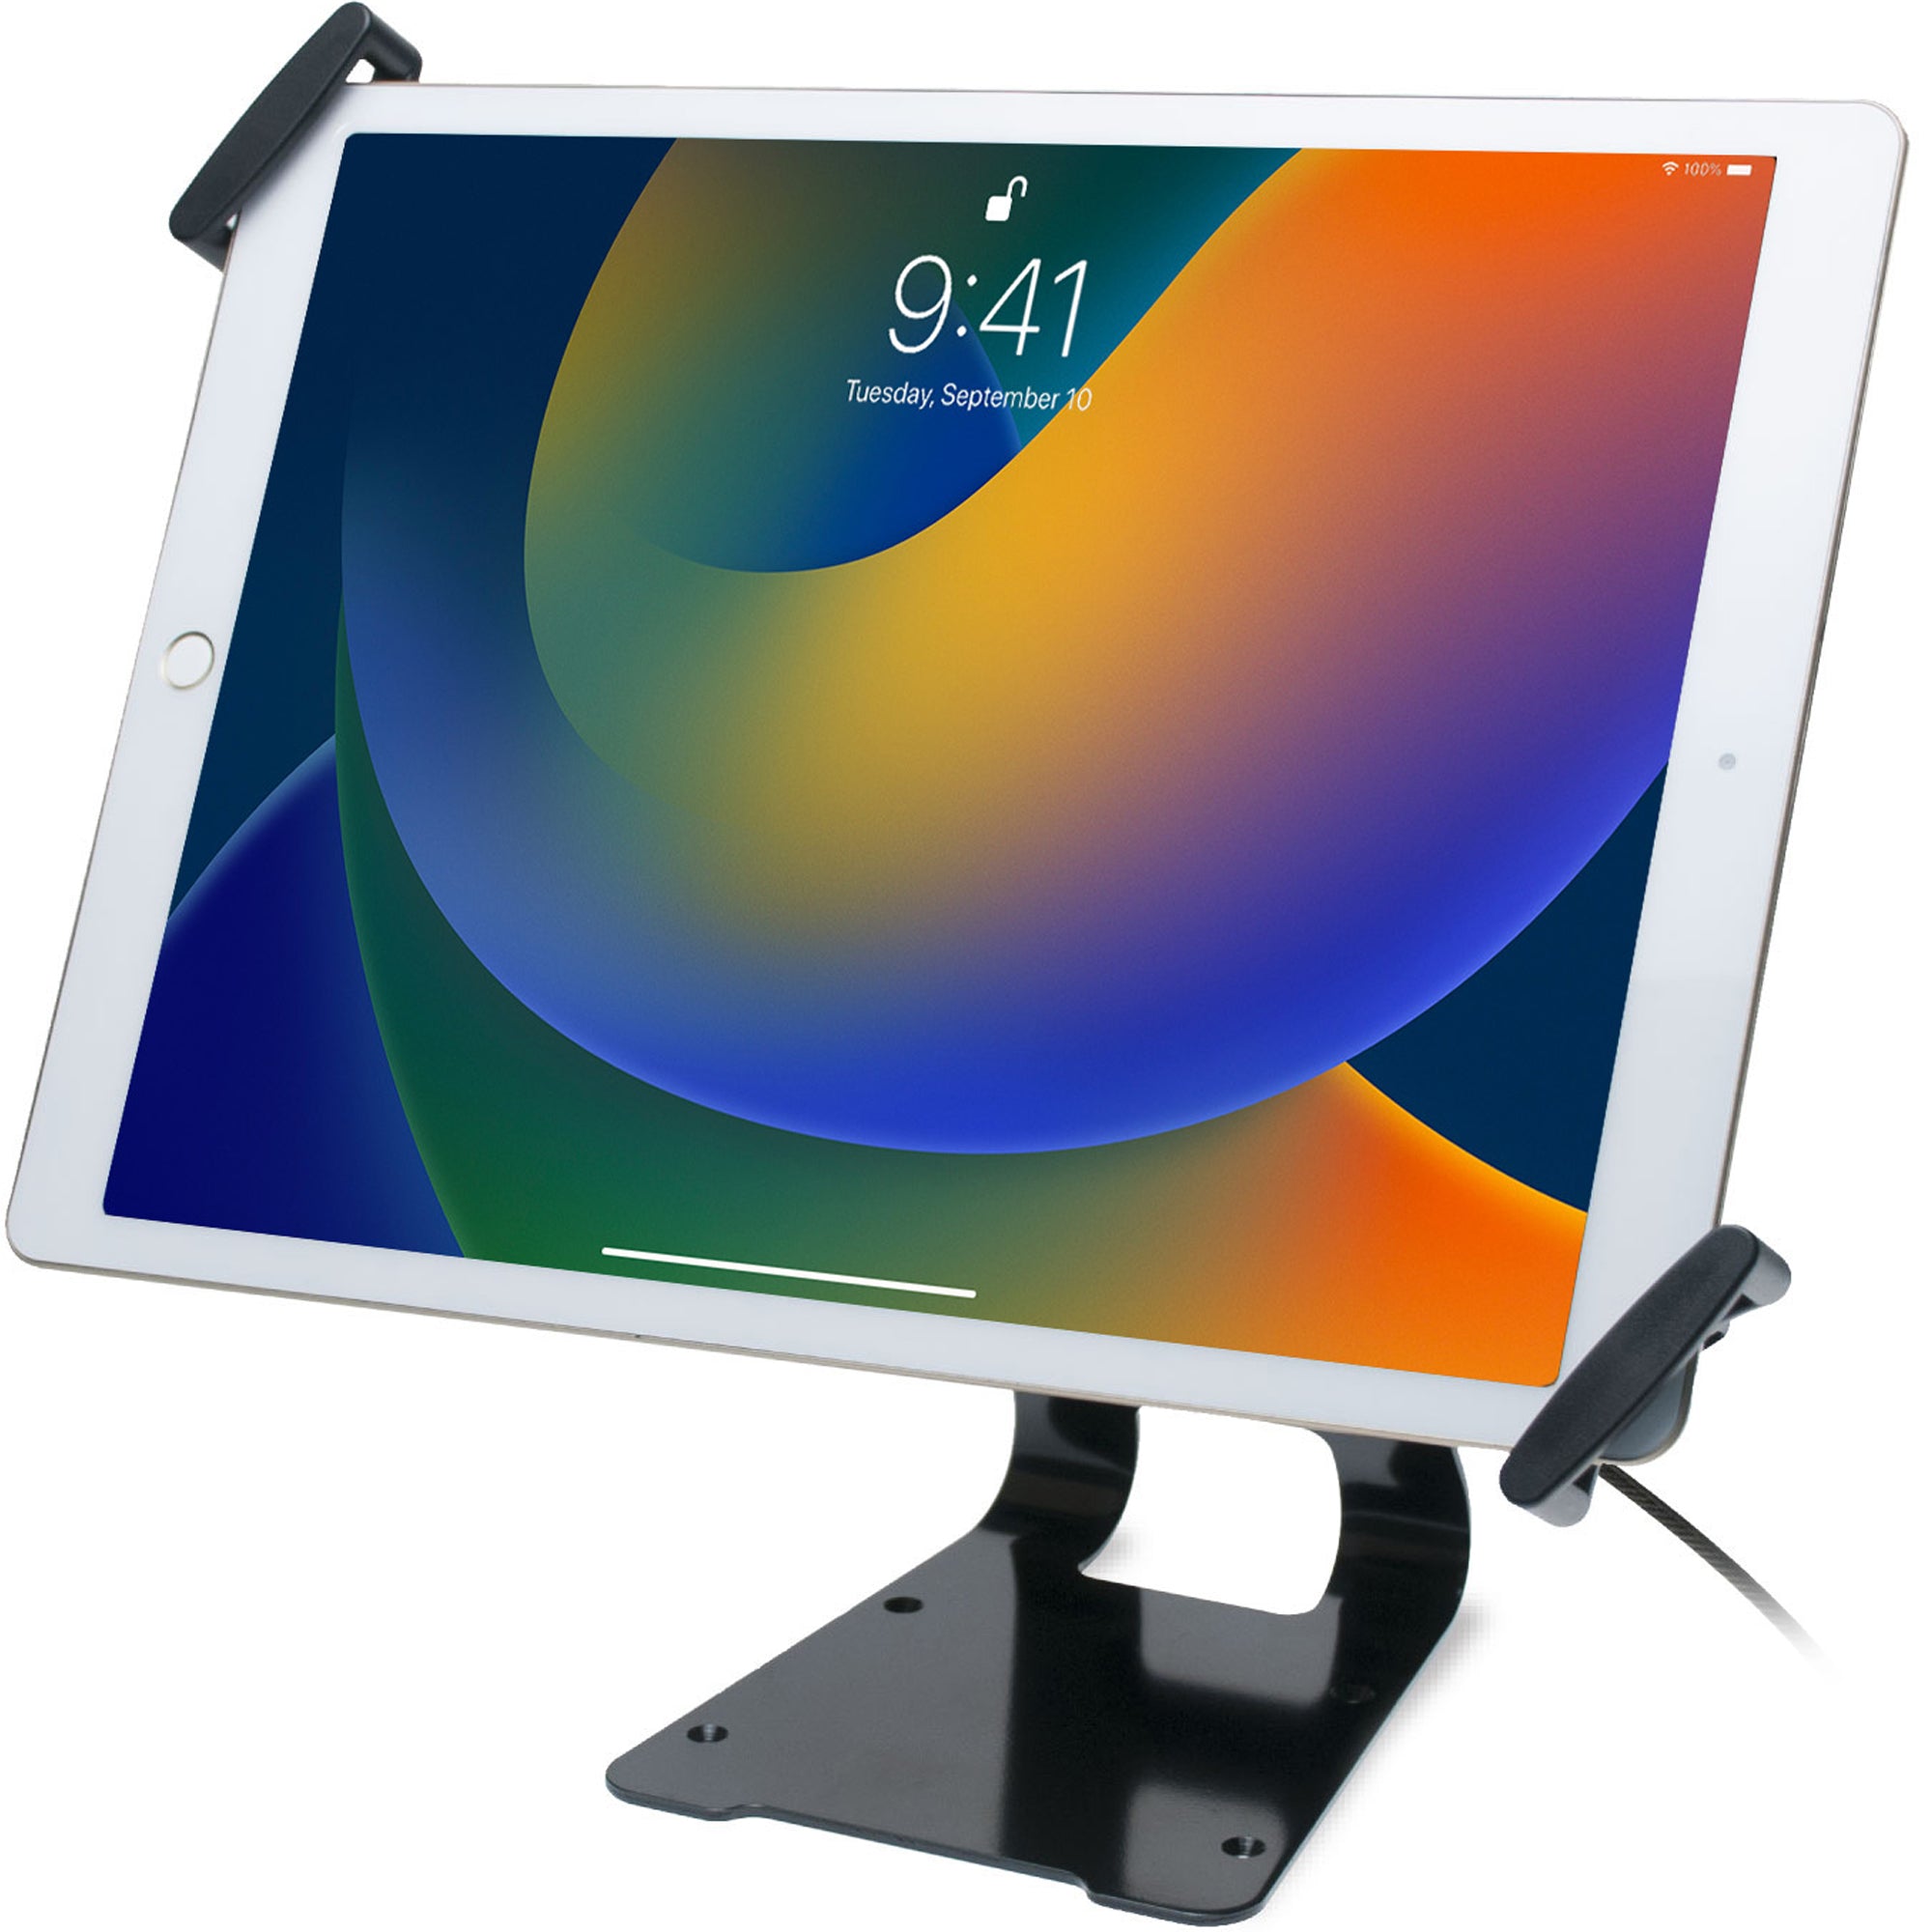 Adjustable Anti-Theft Security Grip & Stand for 9.7 - 14 inch Tablets